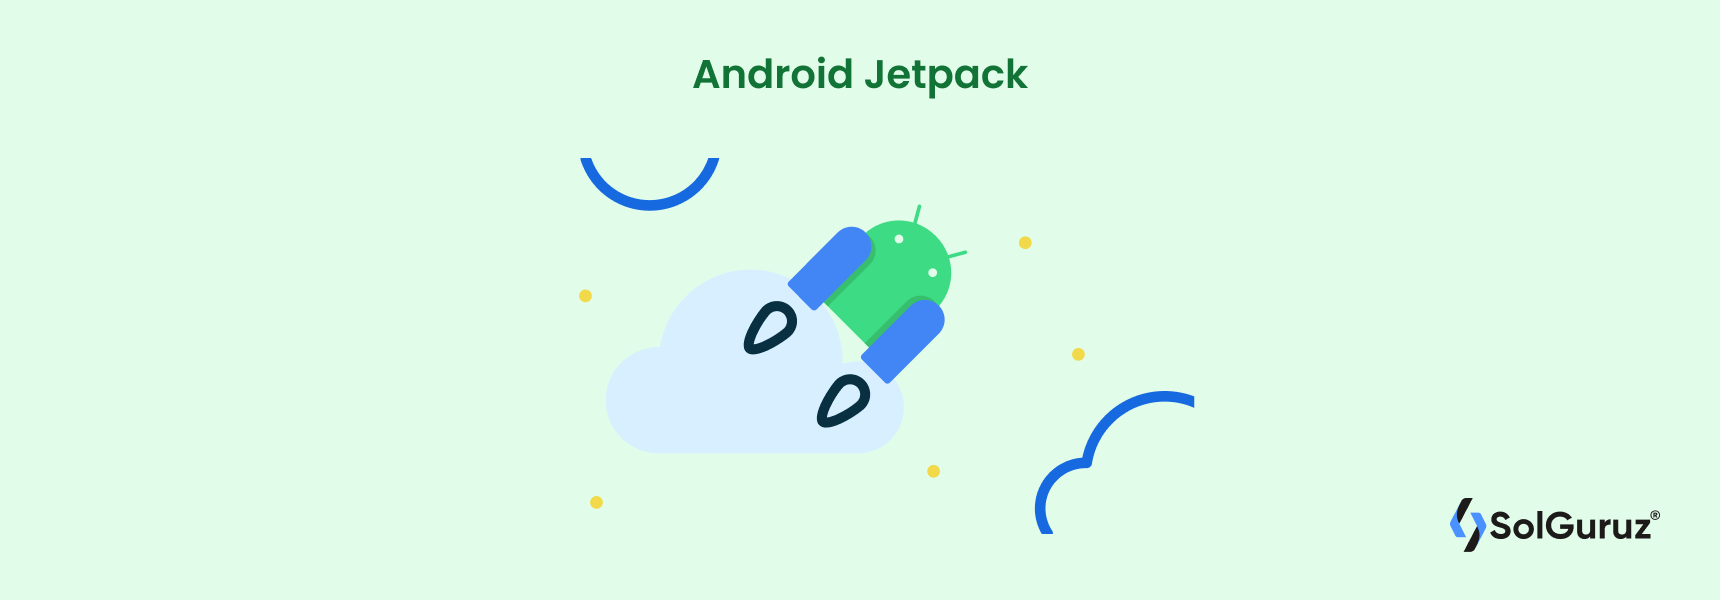 Android Jetpack developers in India